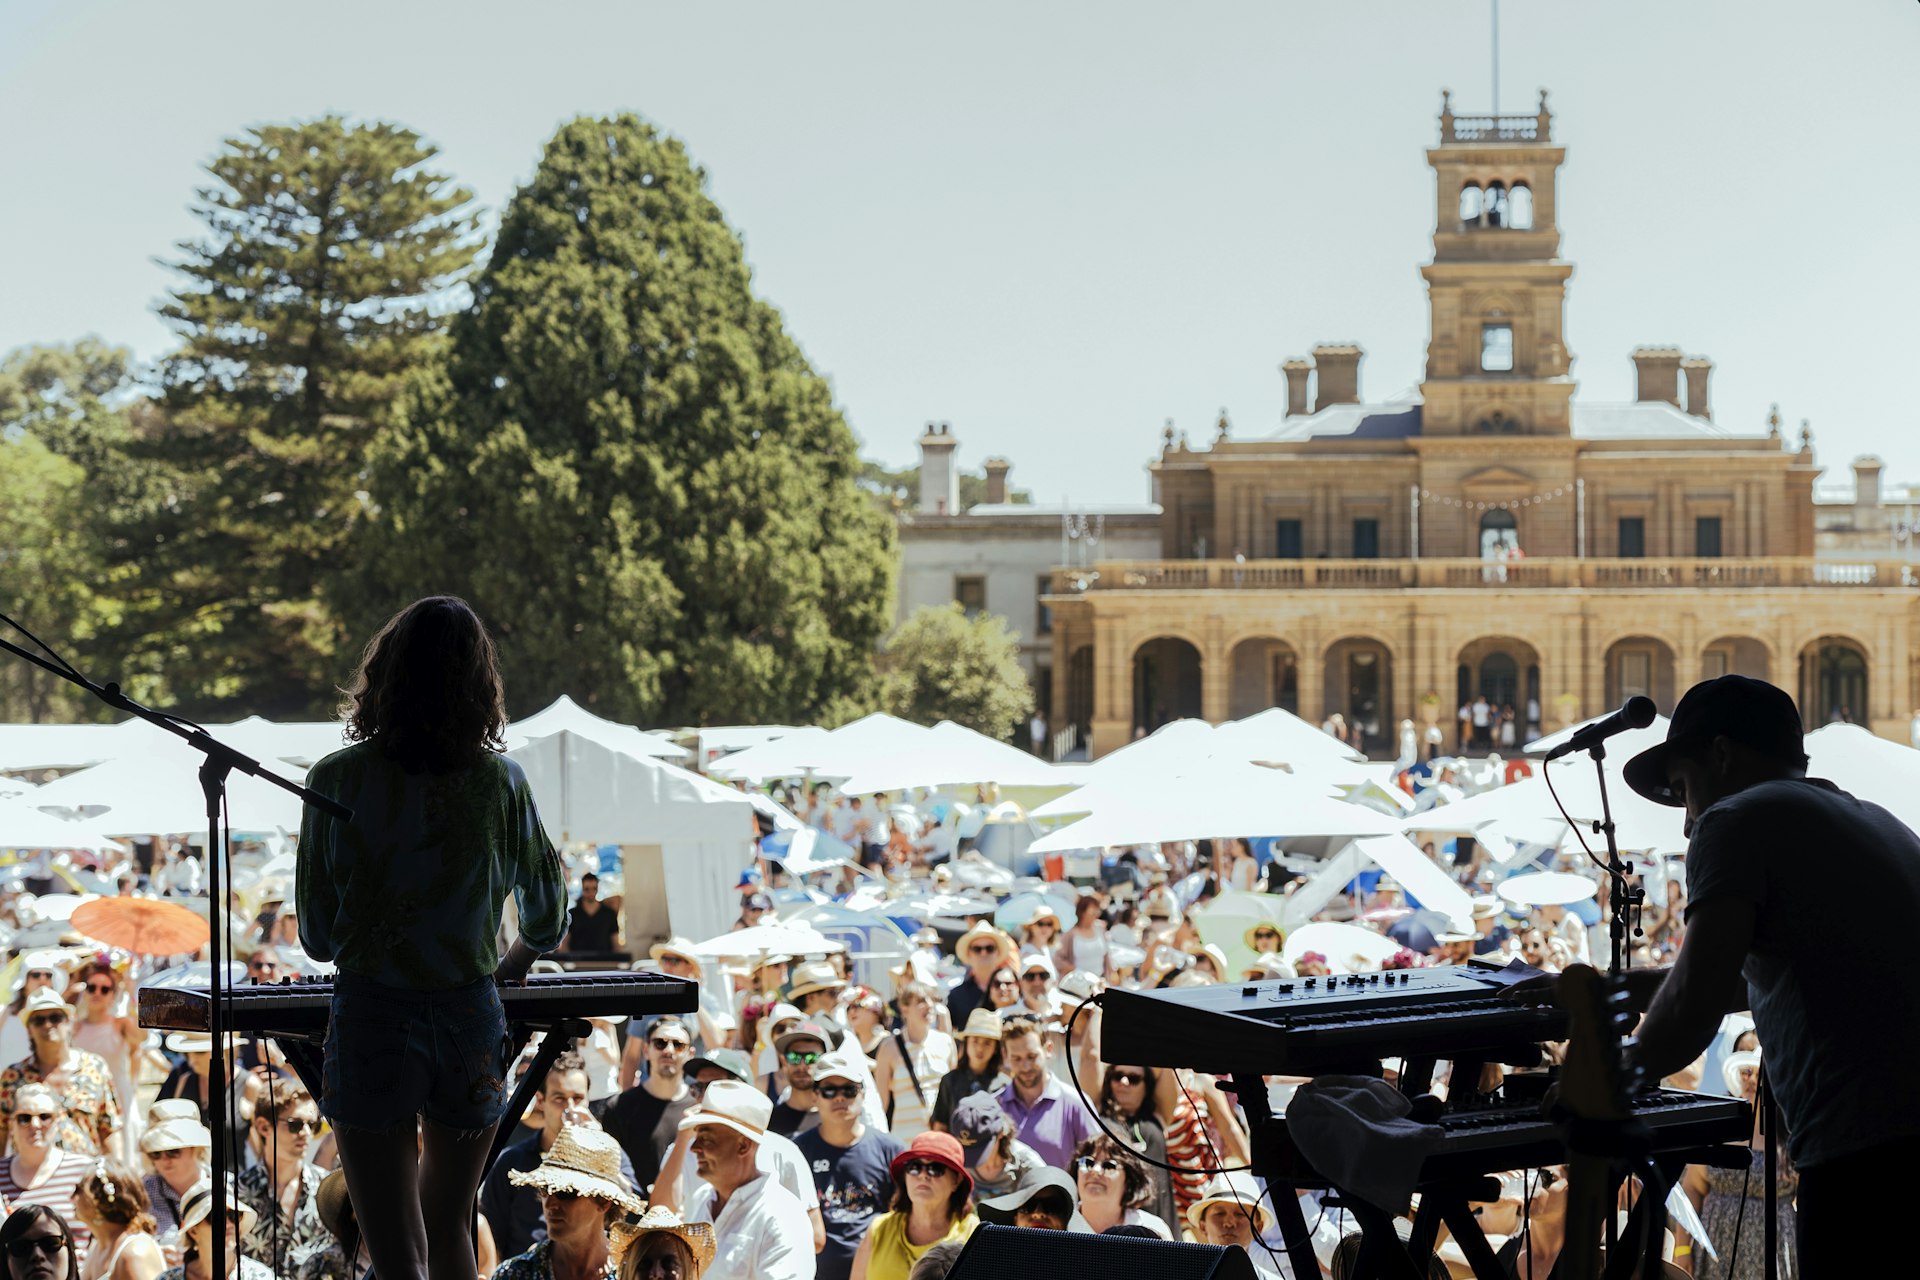 Cléa Vincent performing as part of So Frency So Chic at Werribee Park. The image is taken from behind the artist on stage, with a large crowd visible in the grounds. Behind them is a grand old building.